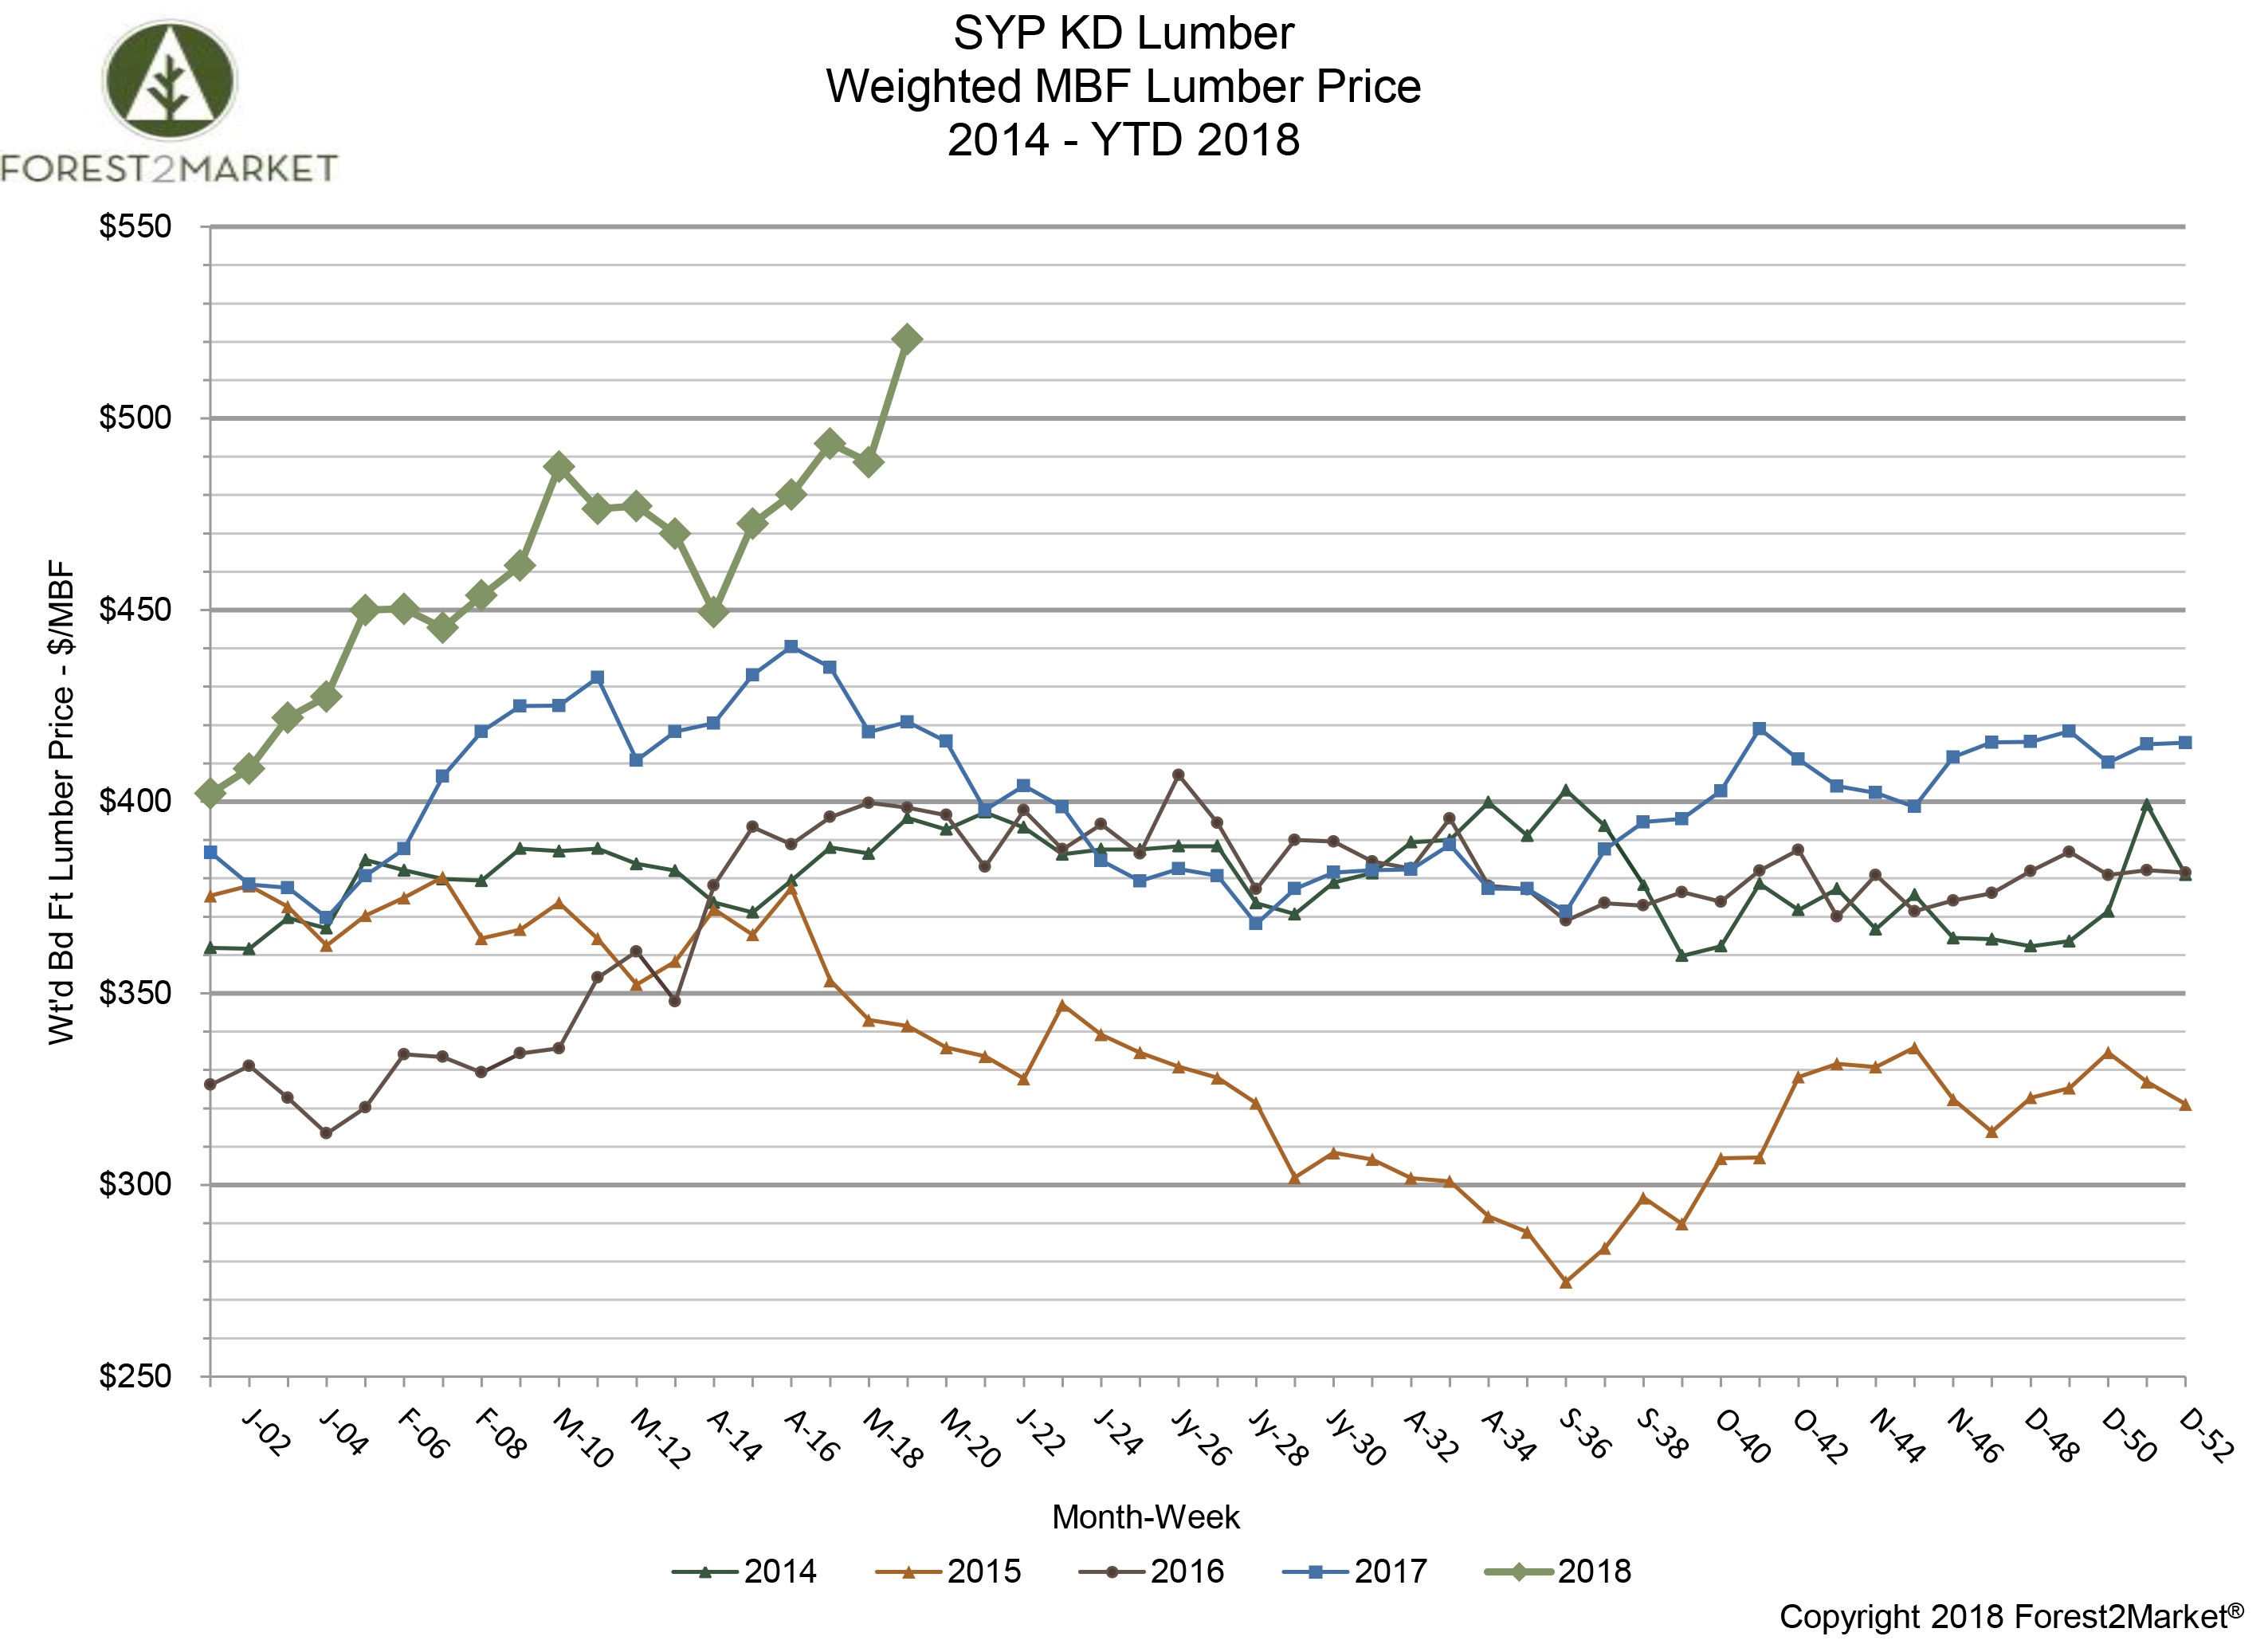 Southern Yellow Pine Lumber Prices Hit New Record High in May